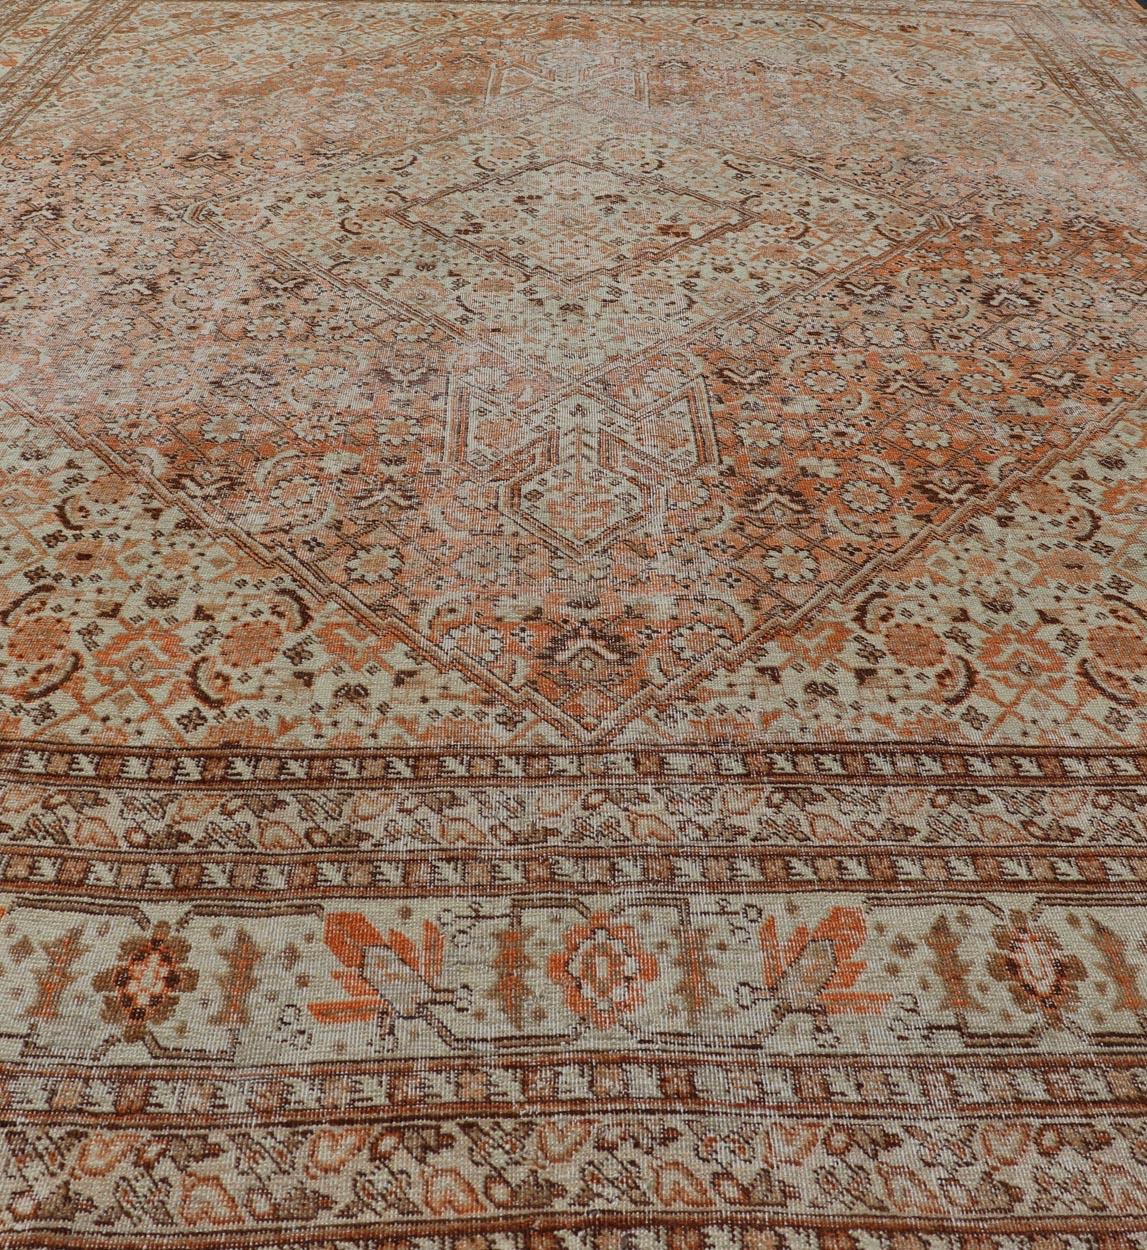 Wool Antique Persian Tabriz with All-Over Medallion Design in Orange and Browns For Sale